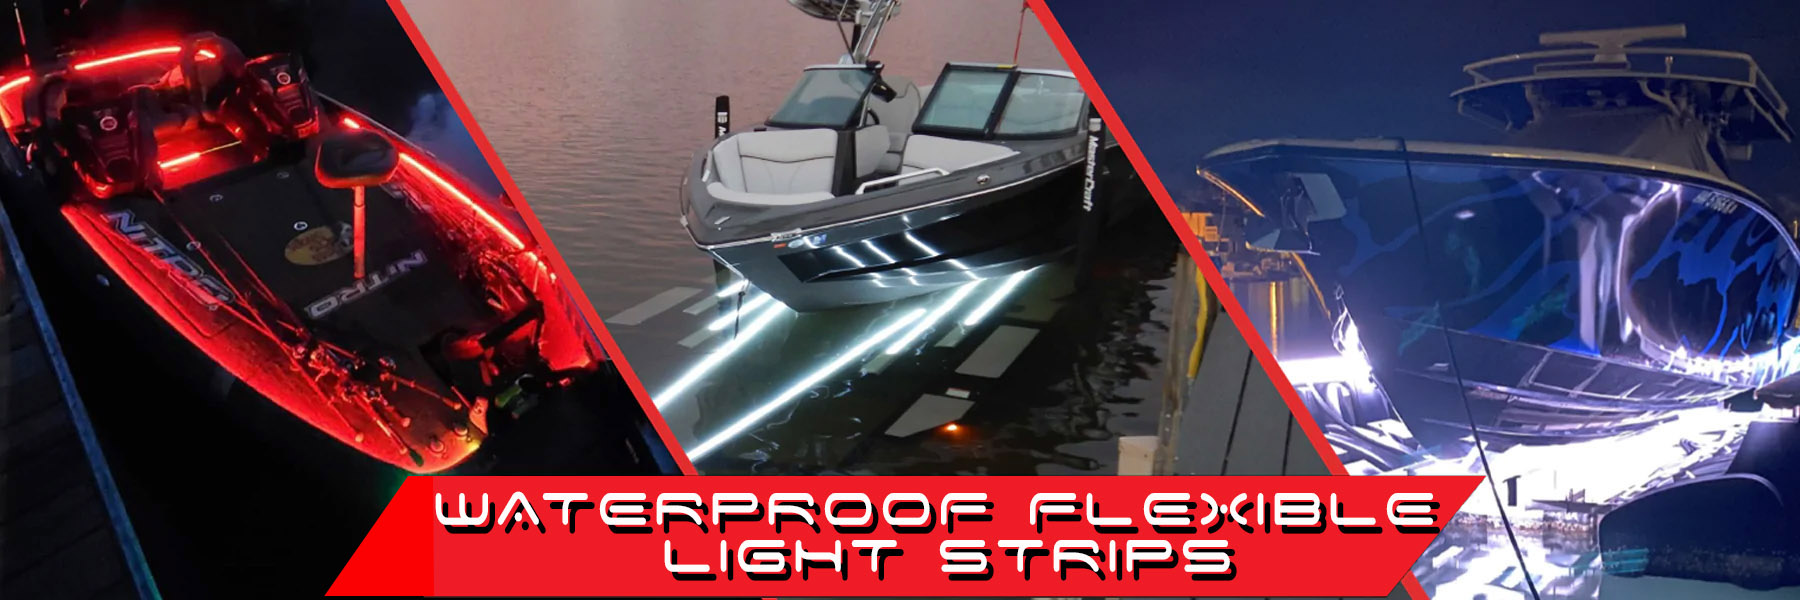 Waterproof LED Strip Lights for Boats and Larger Vessels